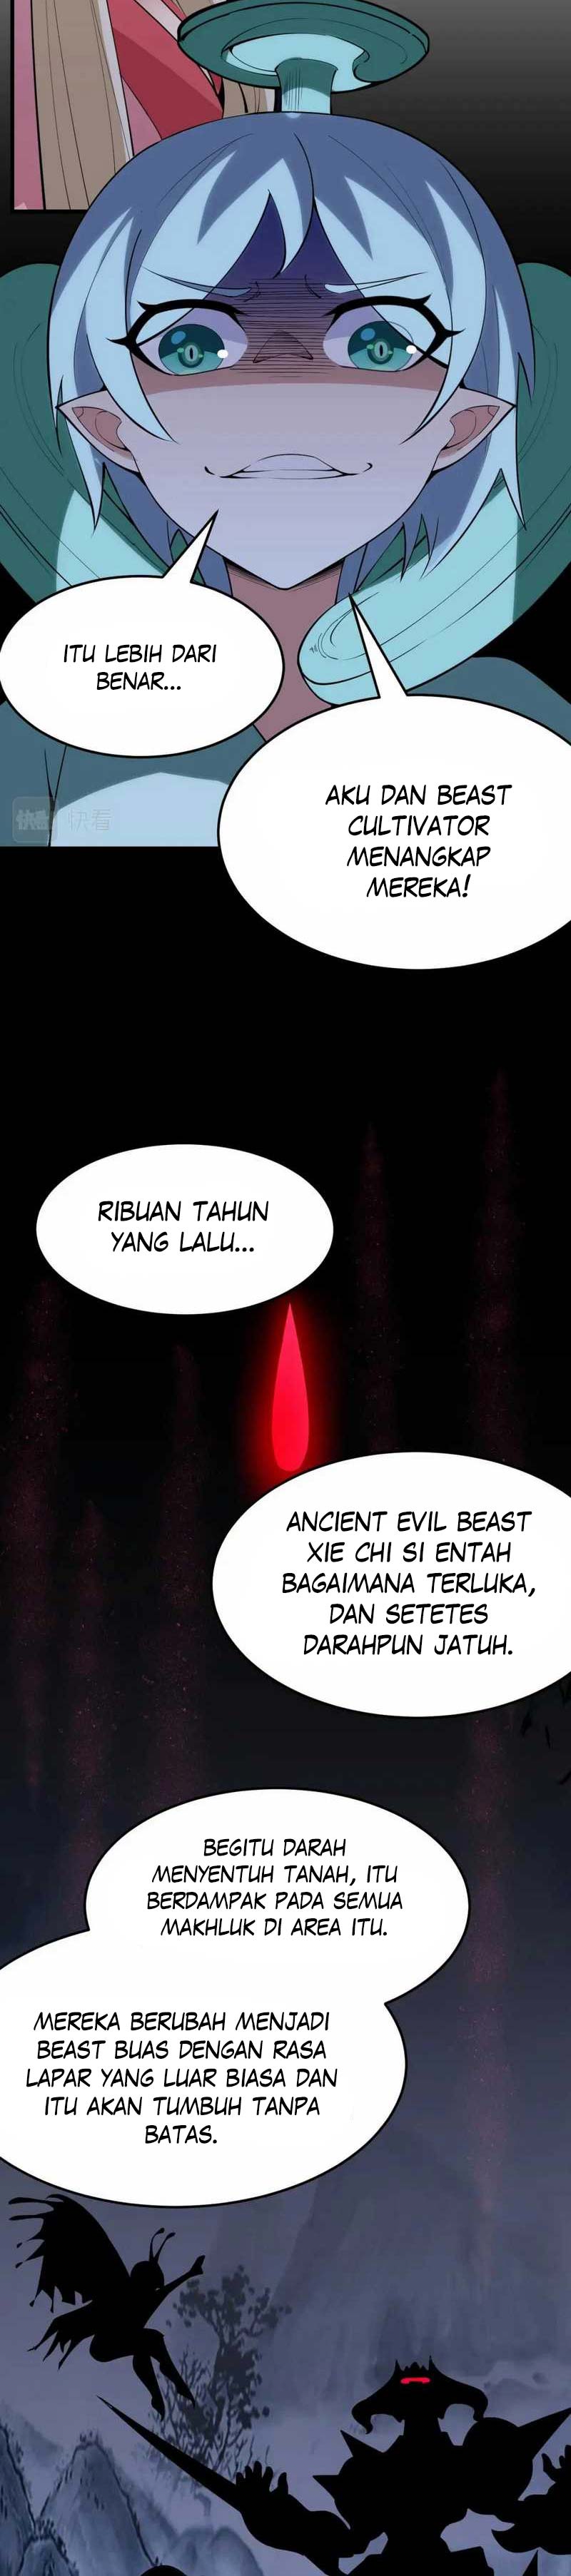 Dilarang COPAS - situs resmi www.mangacanblog.com - Komik i just want to be beaten to death by everyone 116 - chapter 116 117 Indonesia i just want to be beaten to death by everyone 116 - chapter 116 Terbaru 6|Baca Manga Komik Indonesia|Mangacan